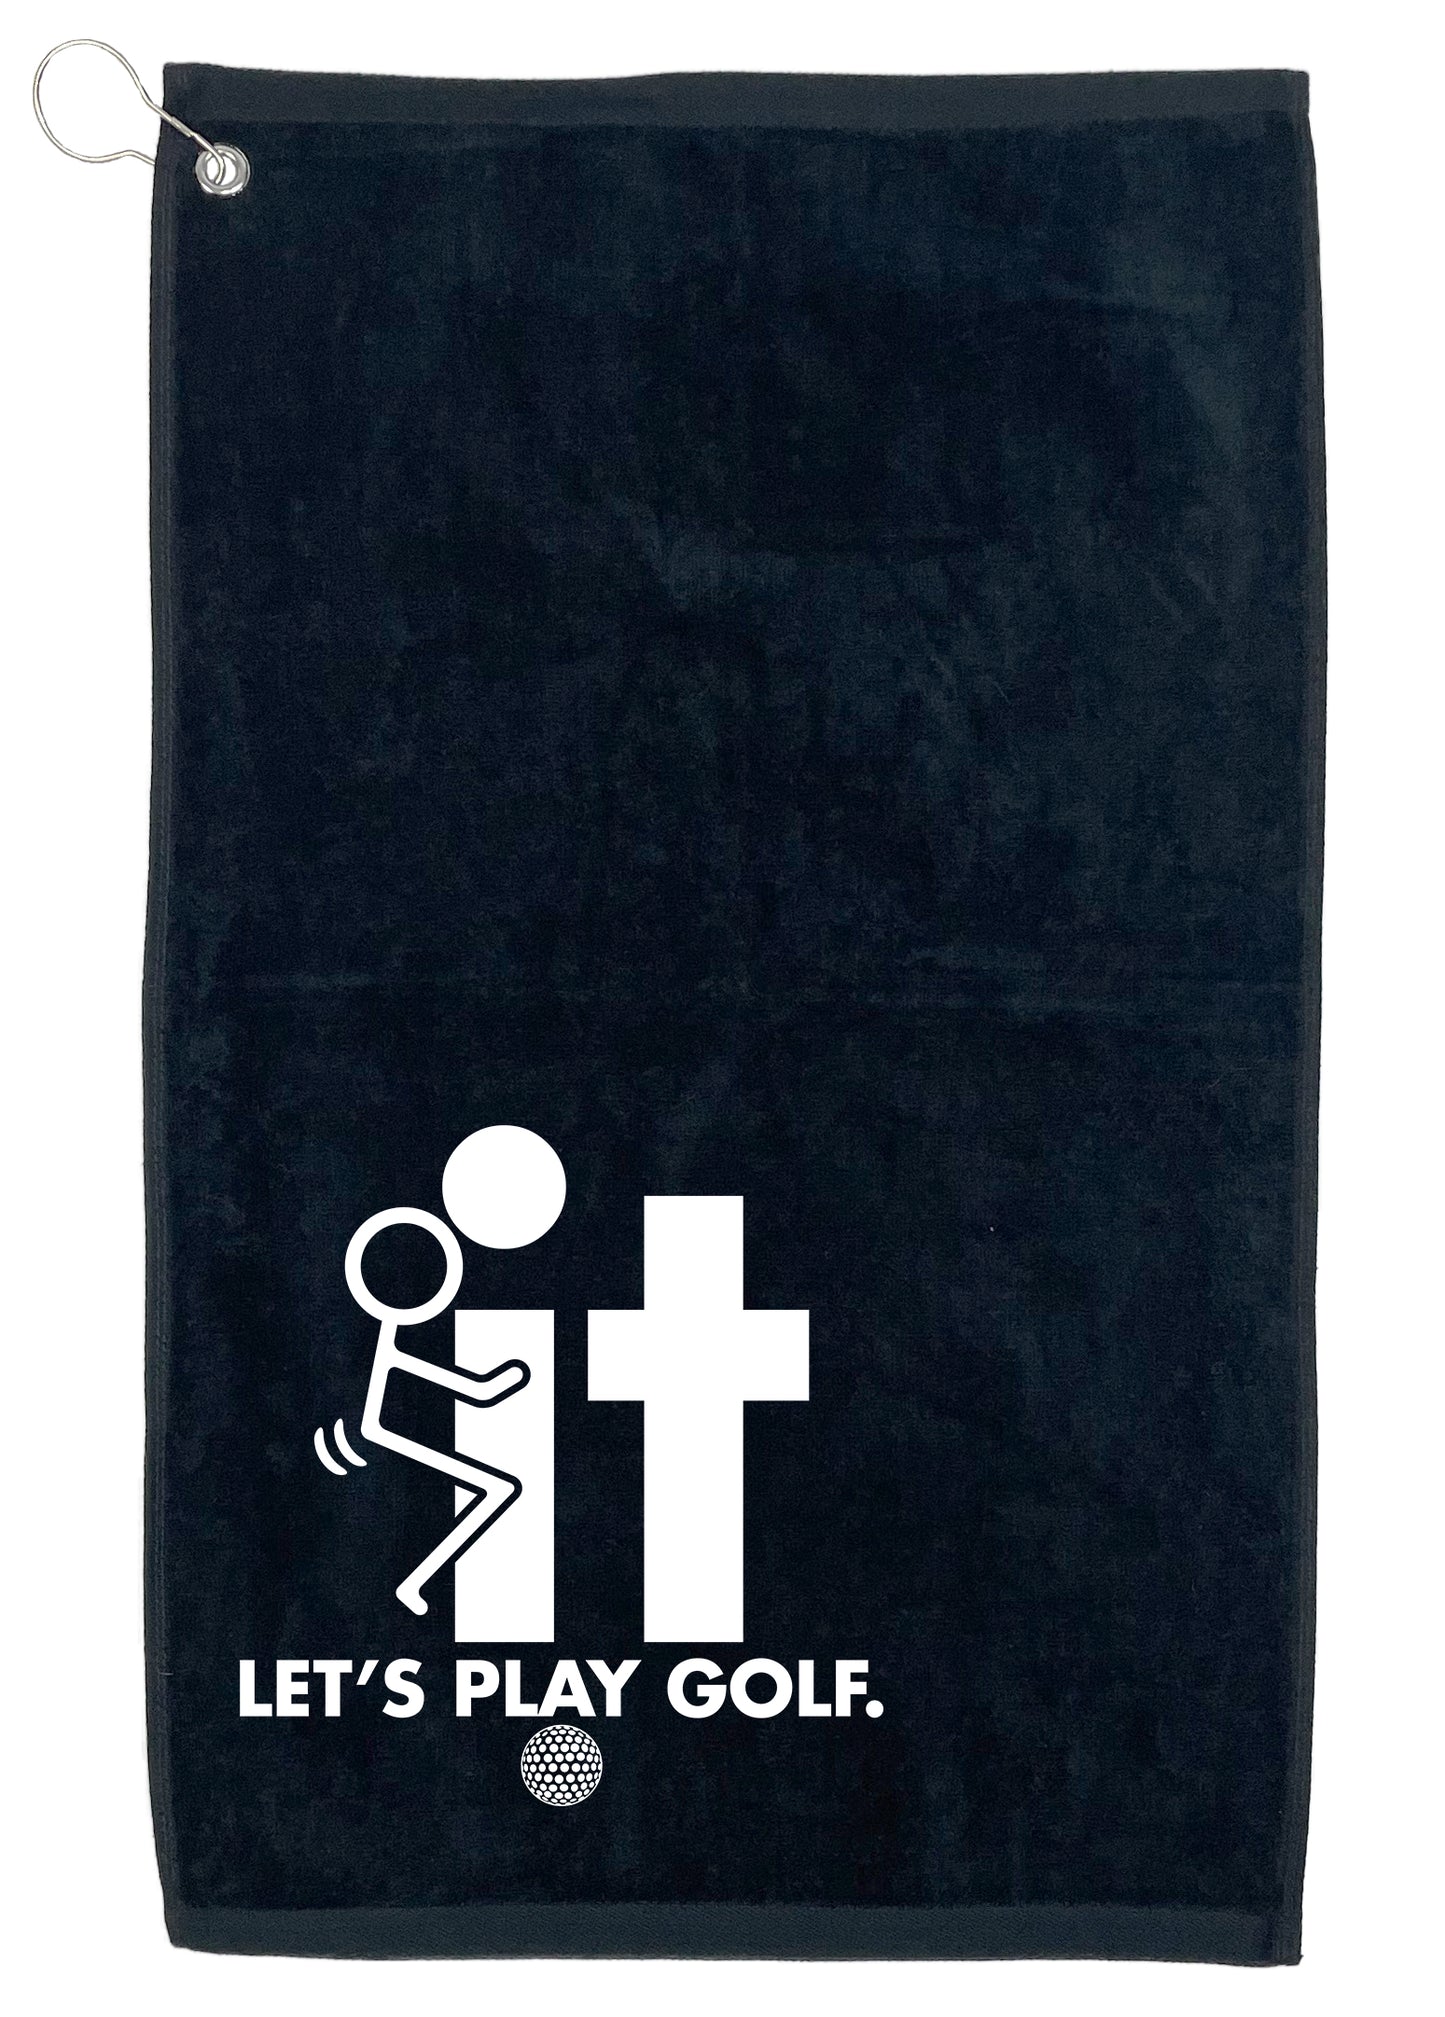 Fuck It Let's Play Golf. Golf Towel - Funny T Shirts & Graphic Tees